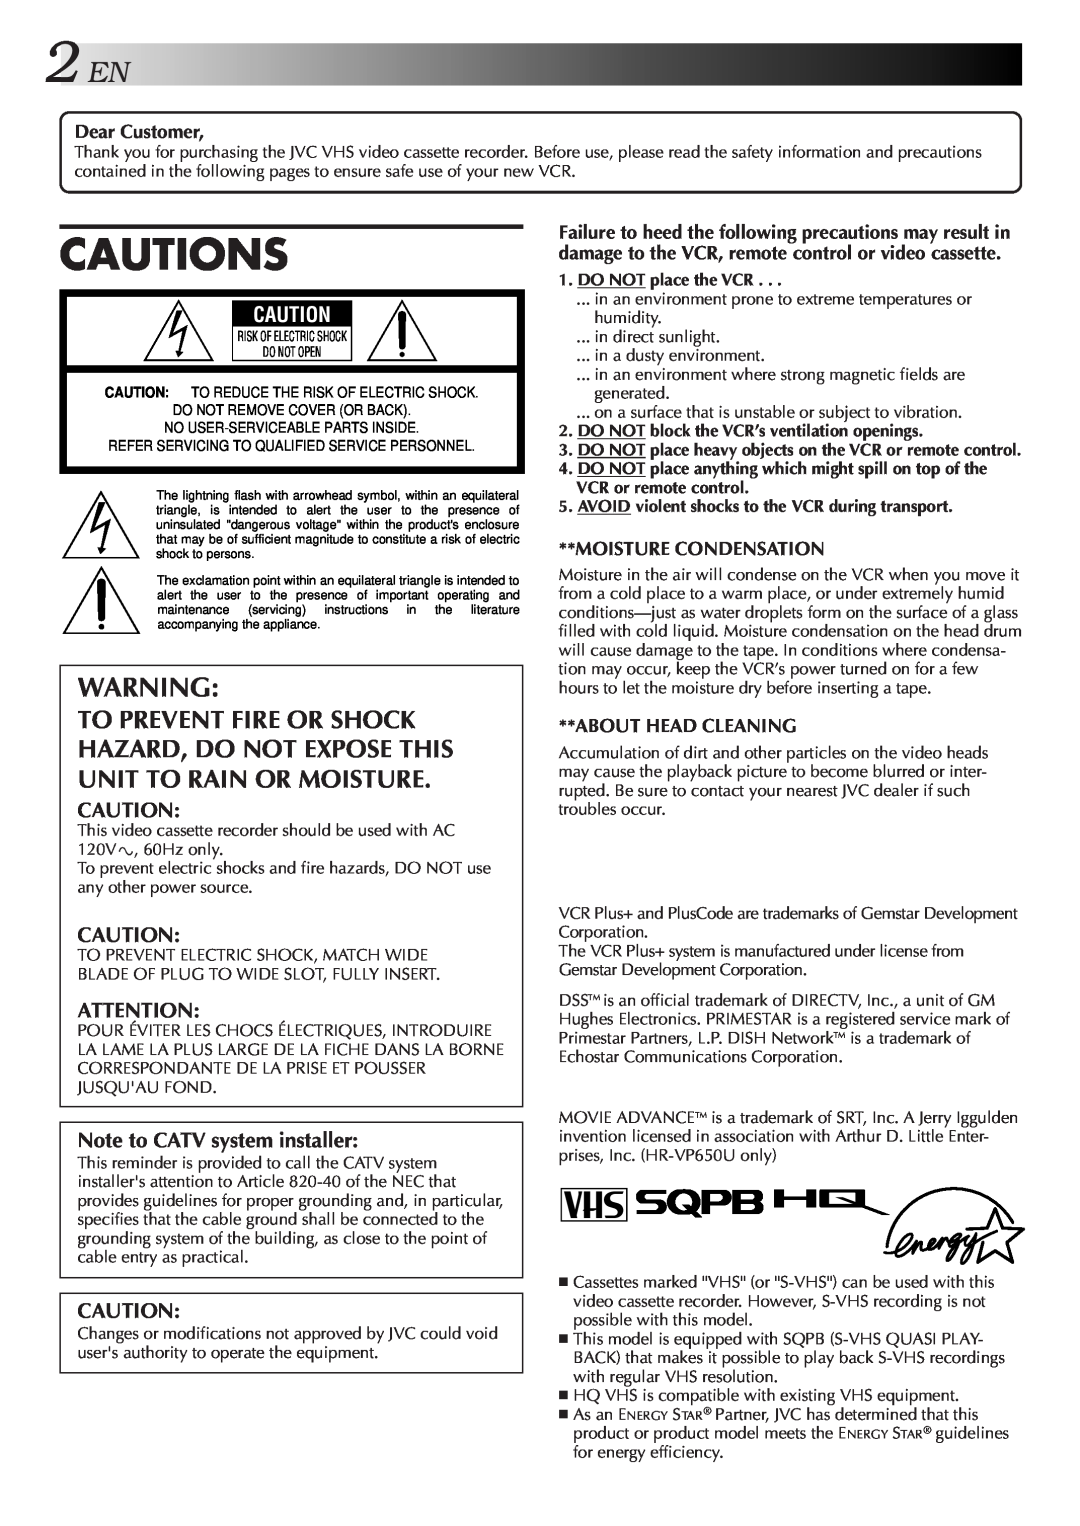 JVC HR-VP650U, HR-VP450U instruction manual Cautions, DO NOT place the VCR, DO NOT block the VCR’s ventilation openings 